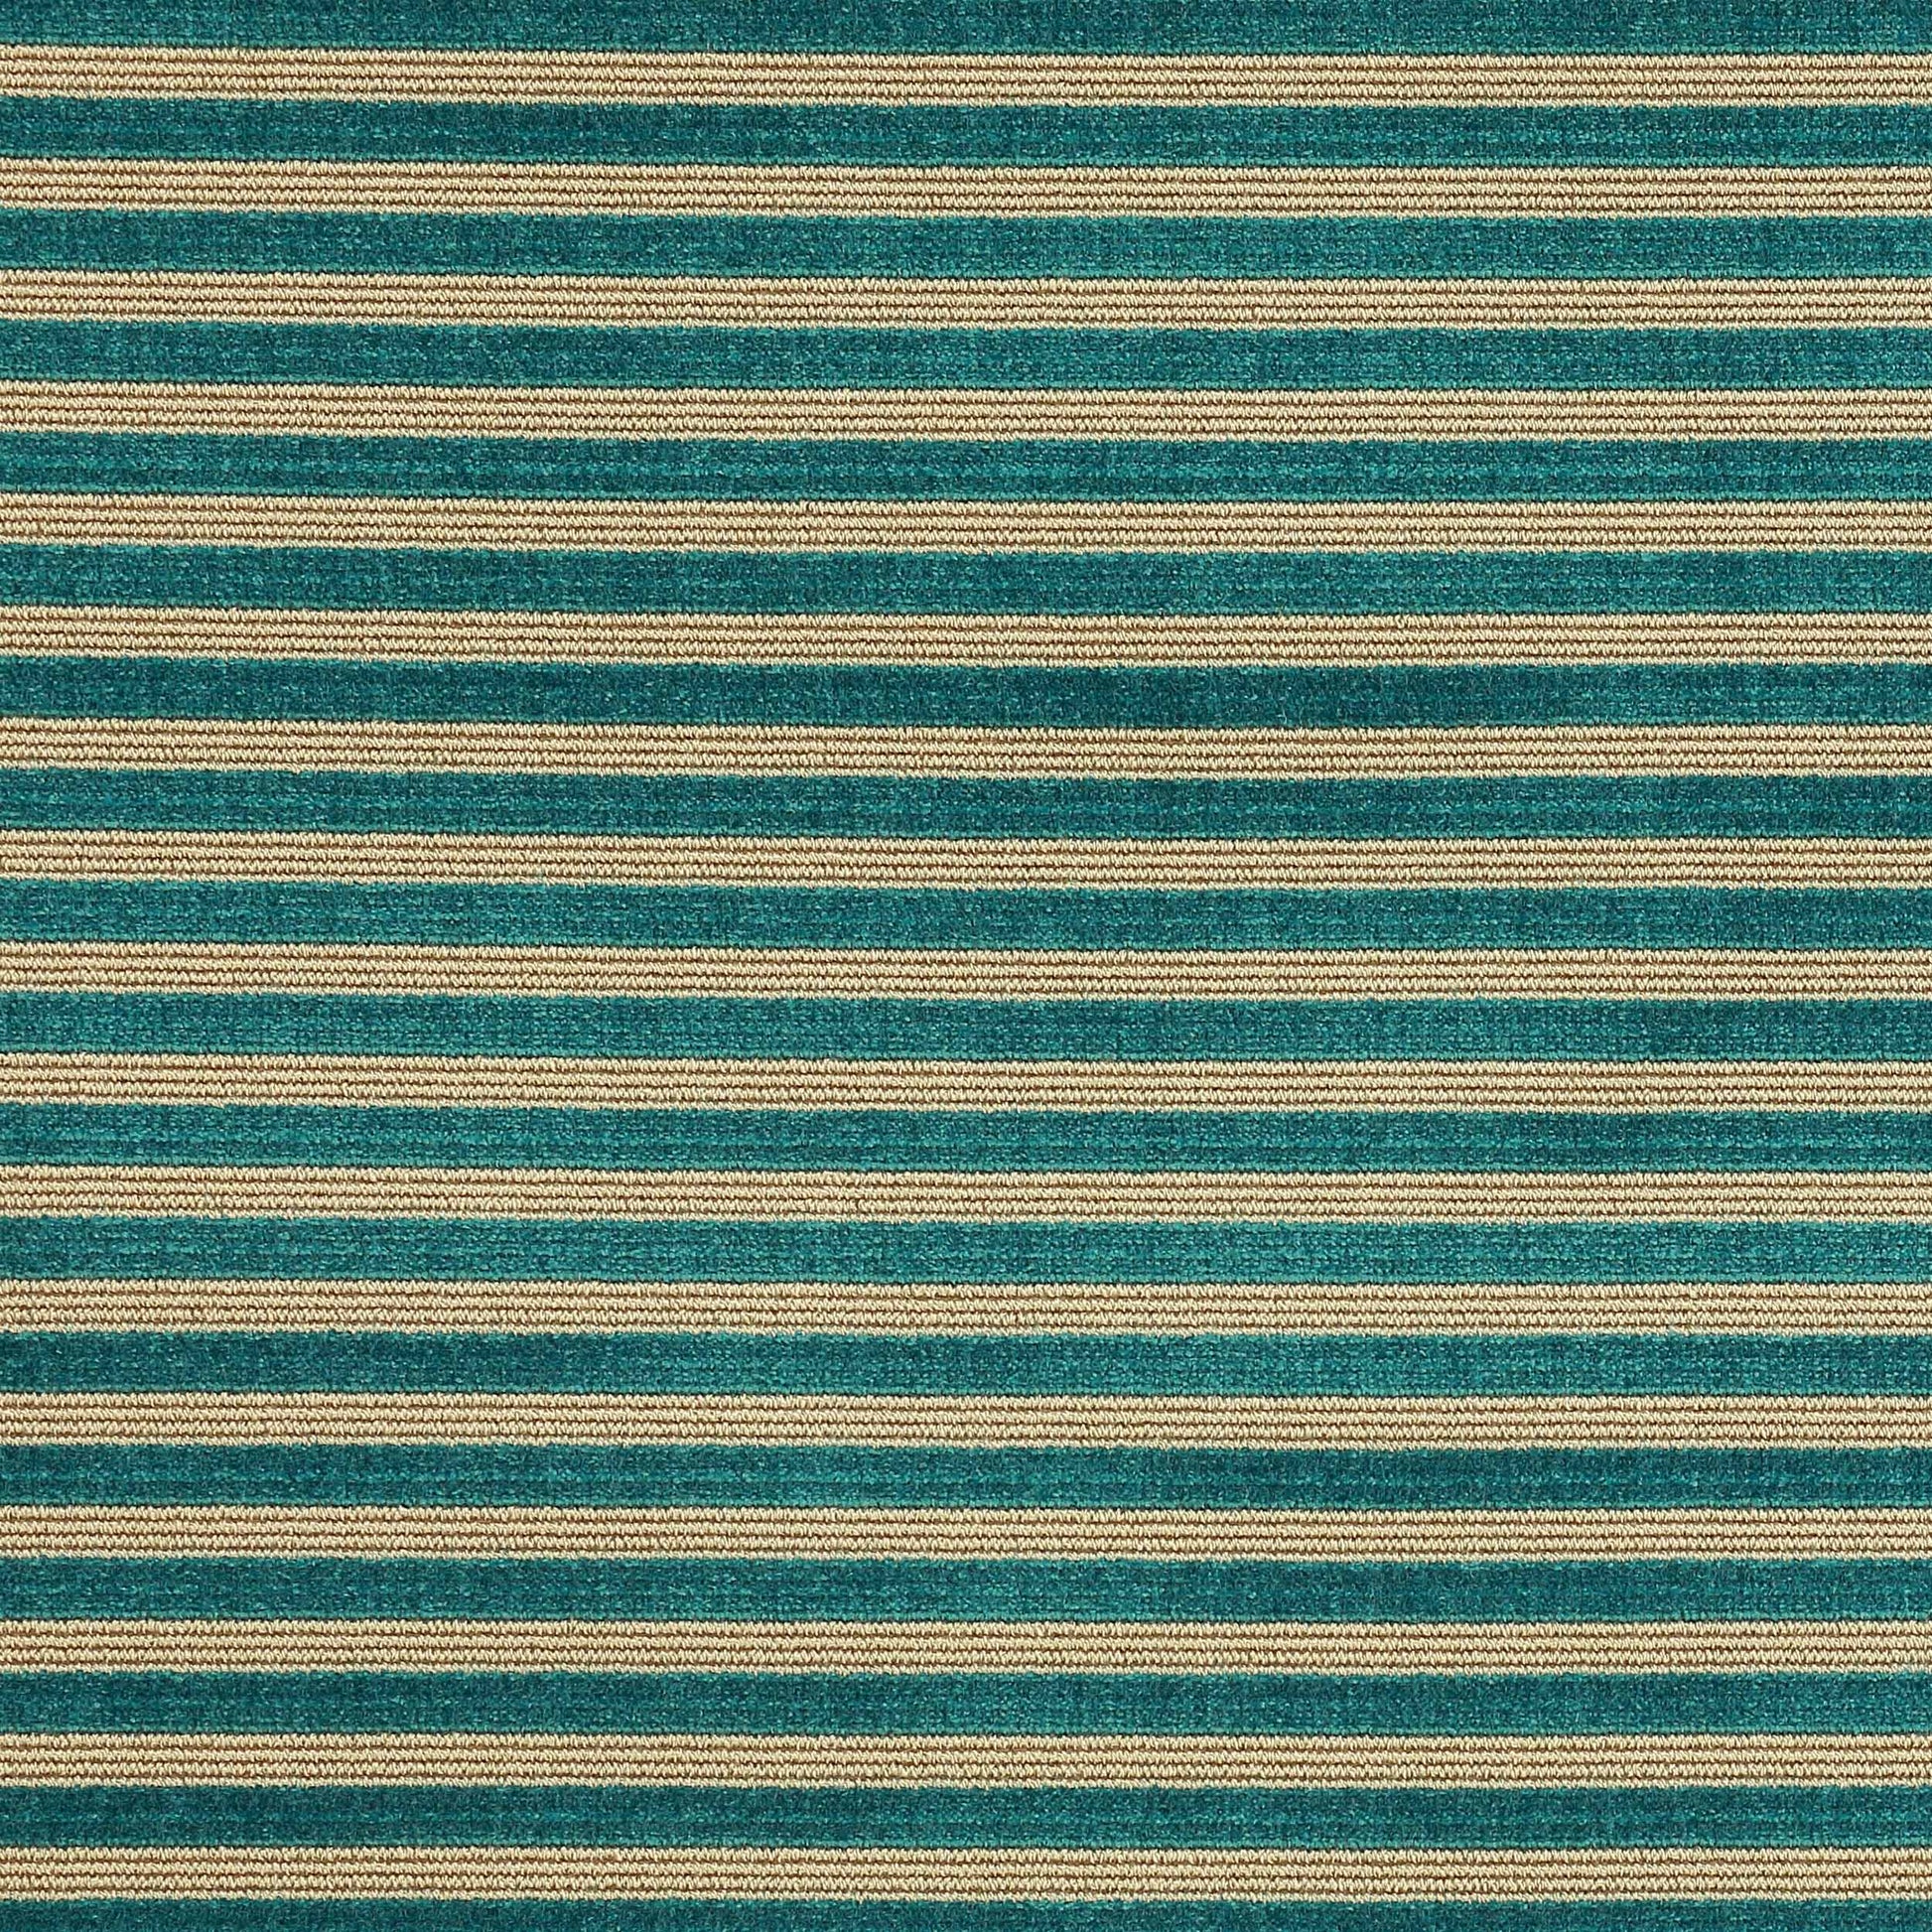 Vauville Fabric - Teal 